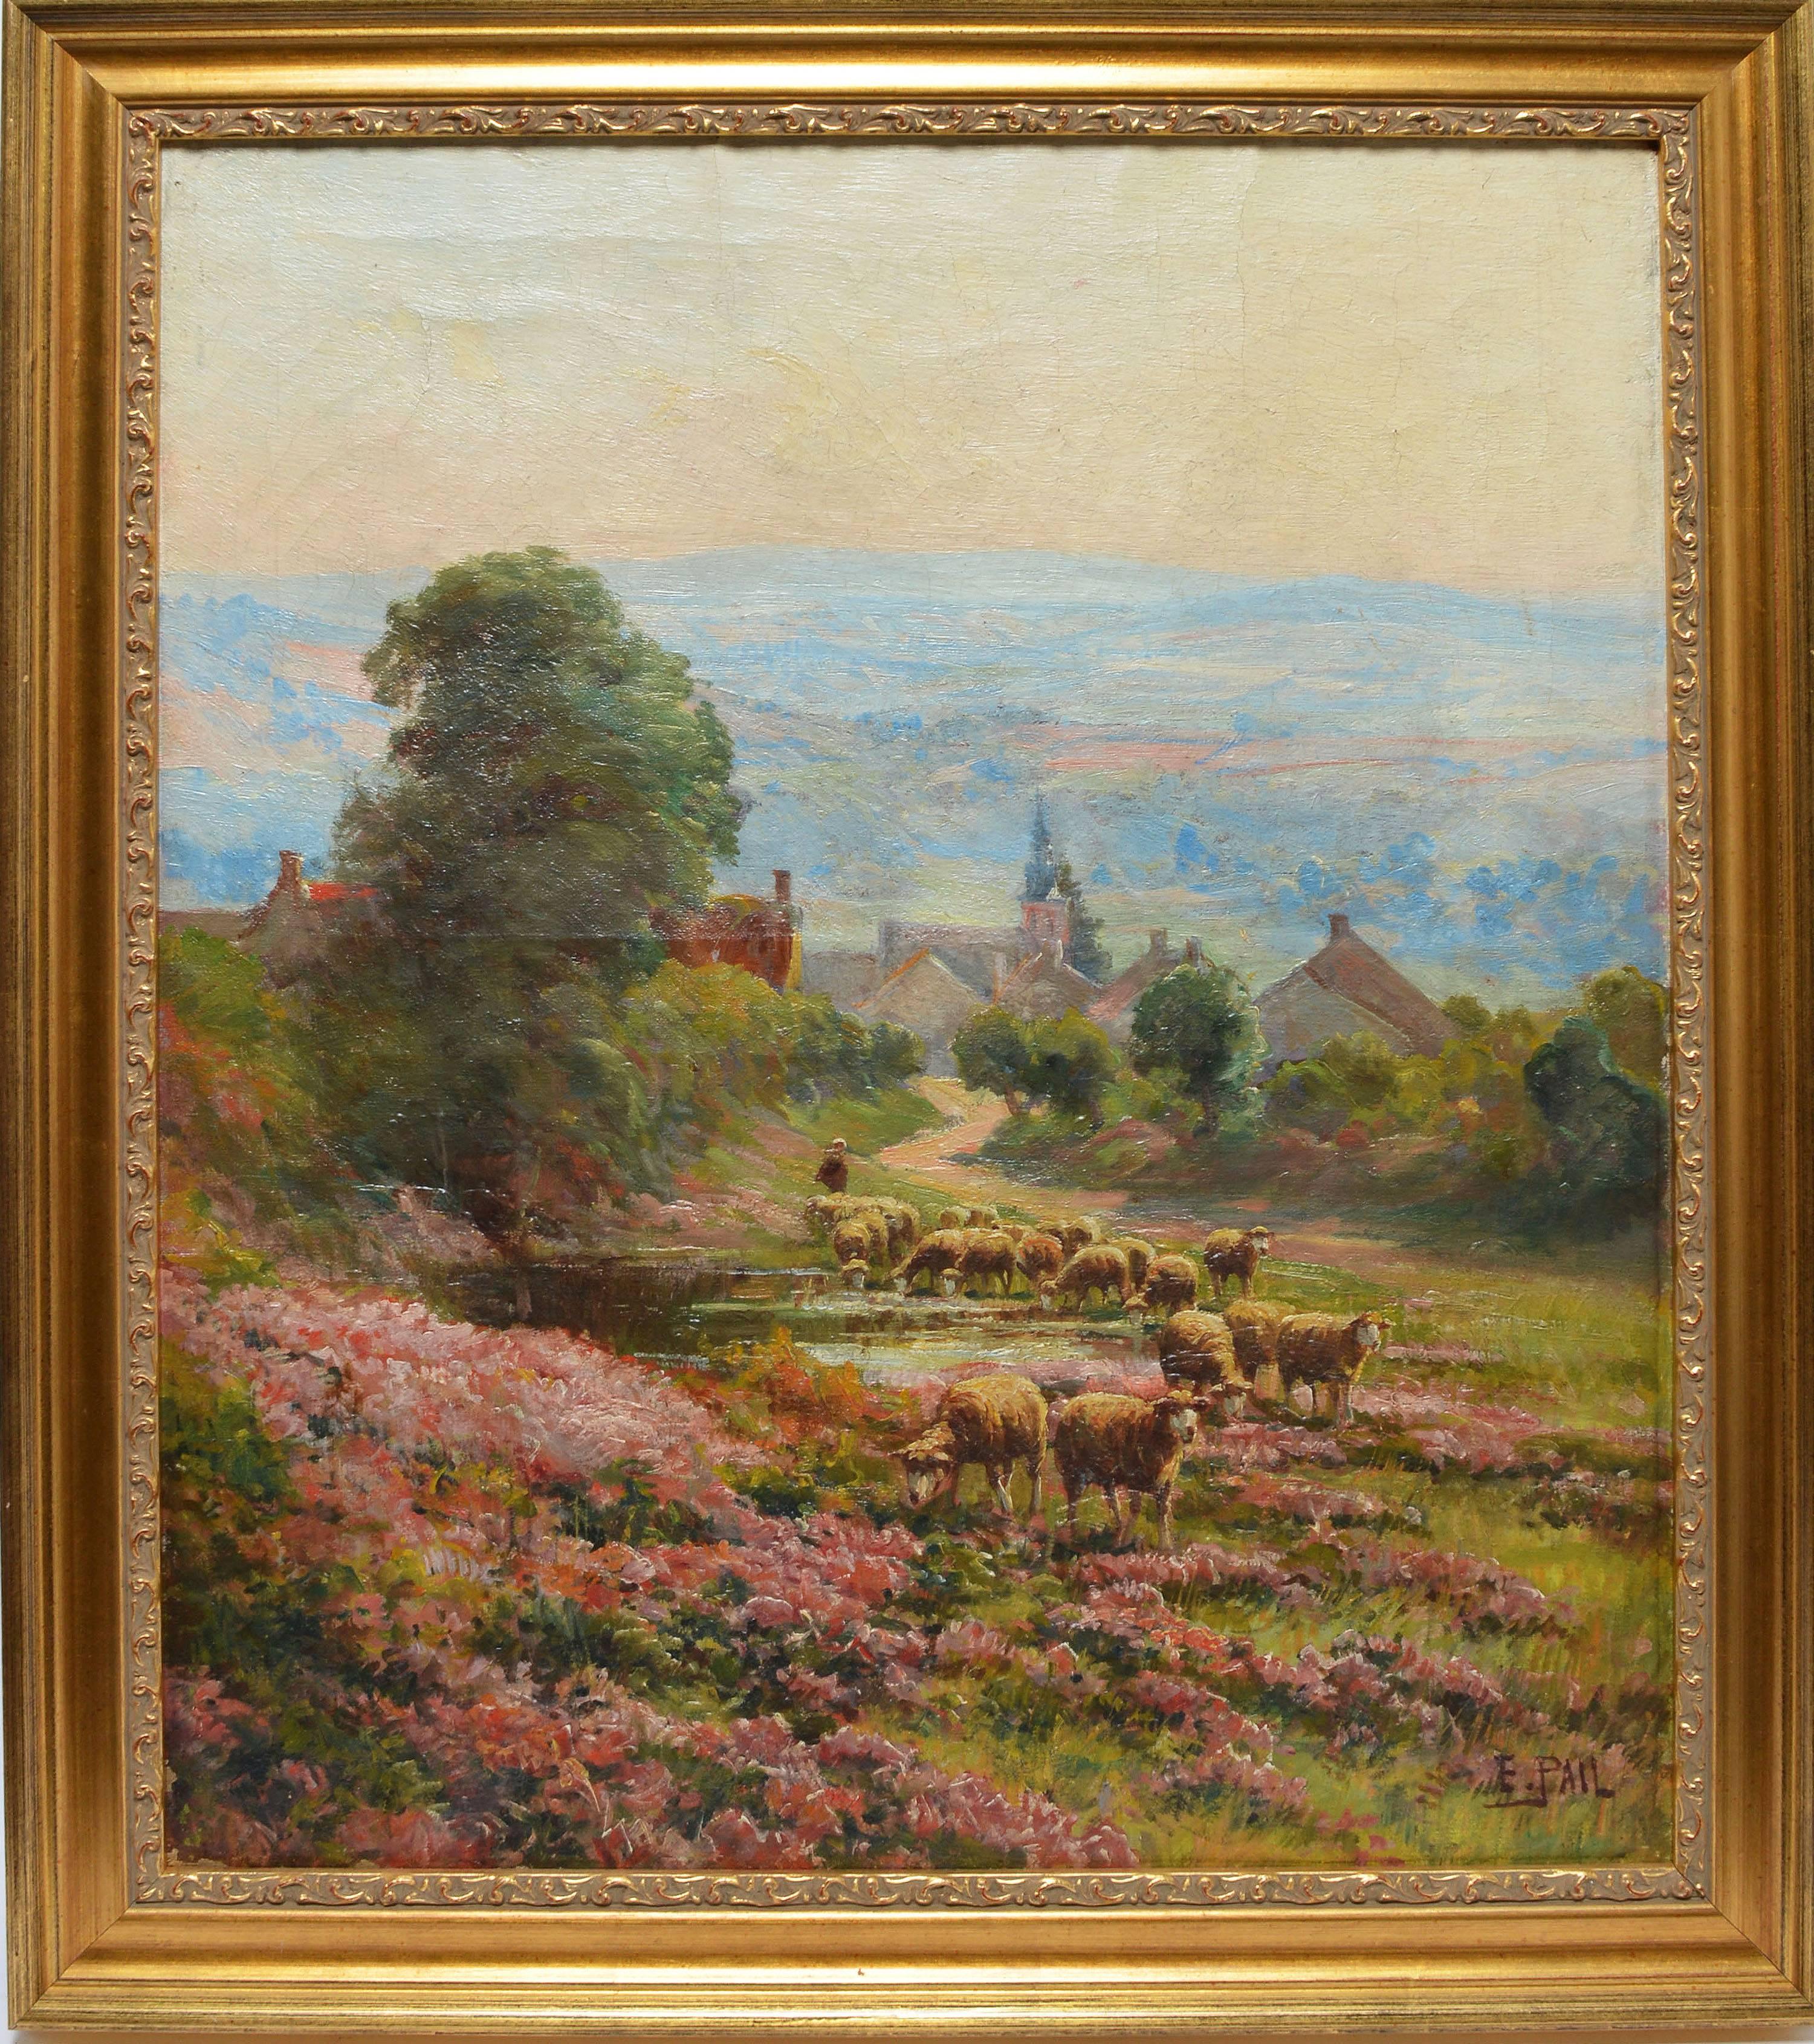 Impressionist landscape with sheep grazing among wild flowers by Edouard Pail  (1851 - 1916).  Oil on canvas, circa 1880.  Signed lower right, "E. Pail".  Displayed in a giltwood frame.  Image size, 18"L x 22"H, overall 22"L x 26"H.